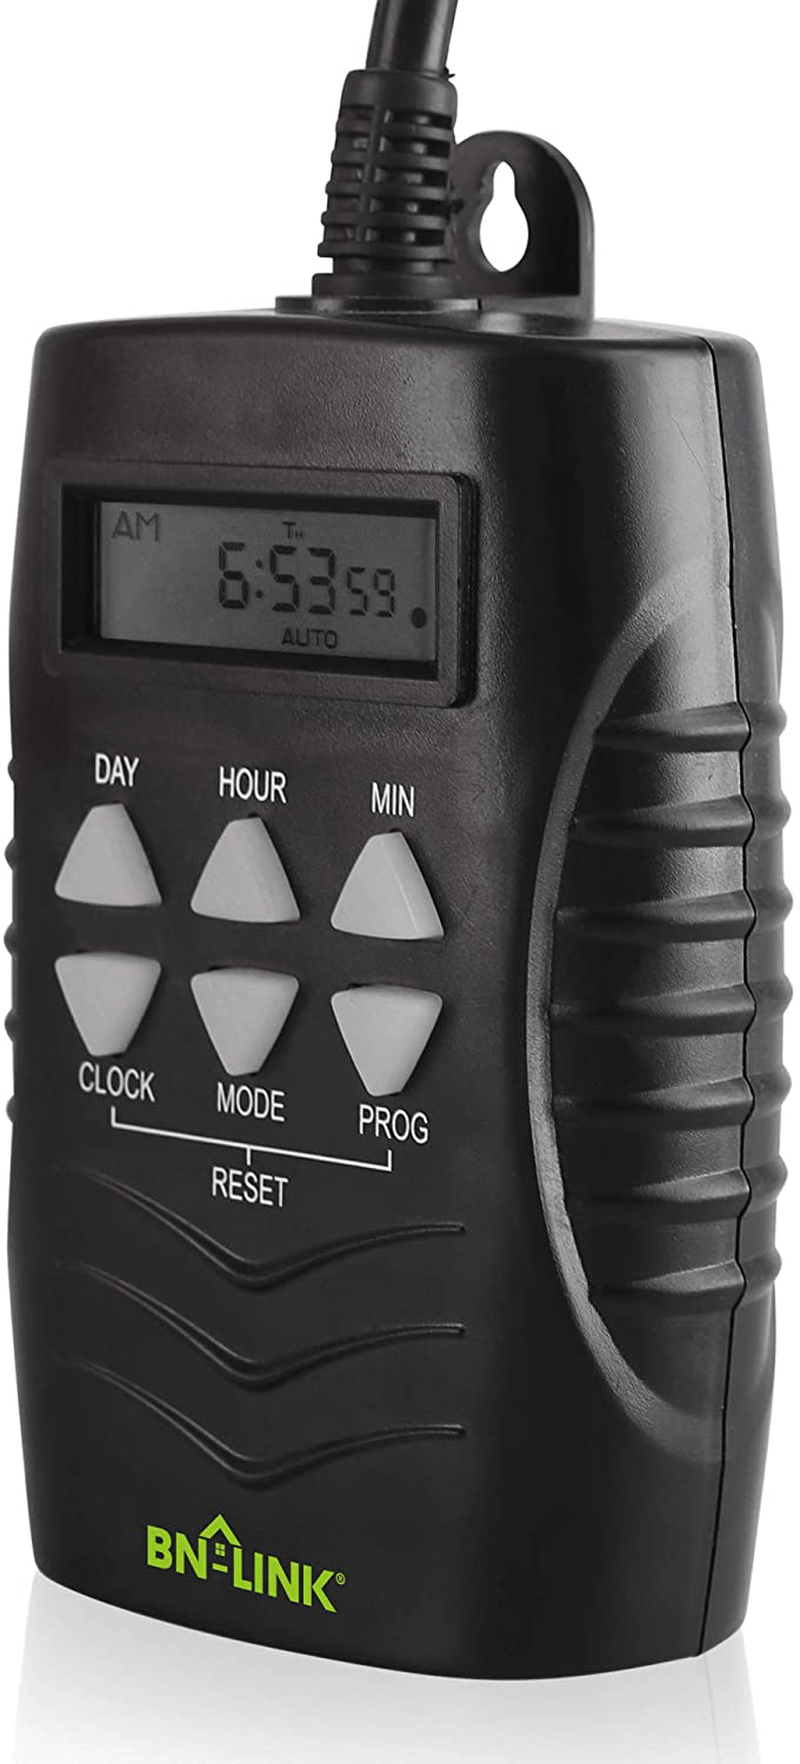 BN-LINK 7 Day Outdoor Heavy Duty Digital Programmable Timer BND/U78, 125VAC, 60Hz, Dual Outlet, Weatherproof, Heavy Duty, Accurate For Lamps Ponds Christmas Lights 1875W 1/2HP ETL Listed Home & Garden > Lighting Accessories > Lighting Timers BN-LINK   